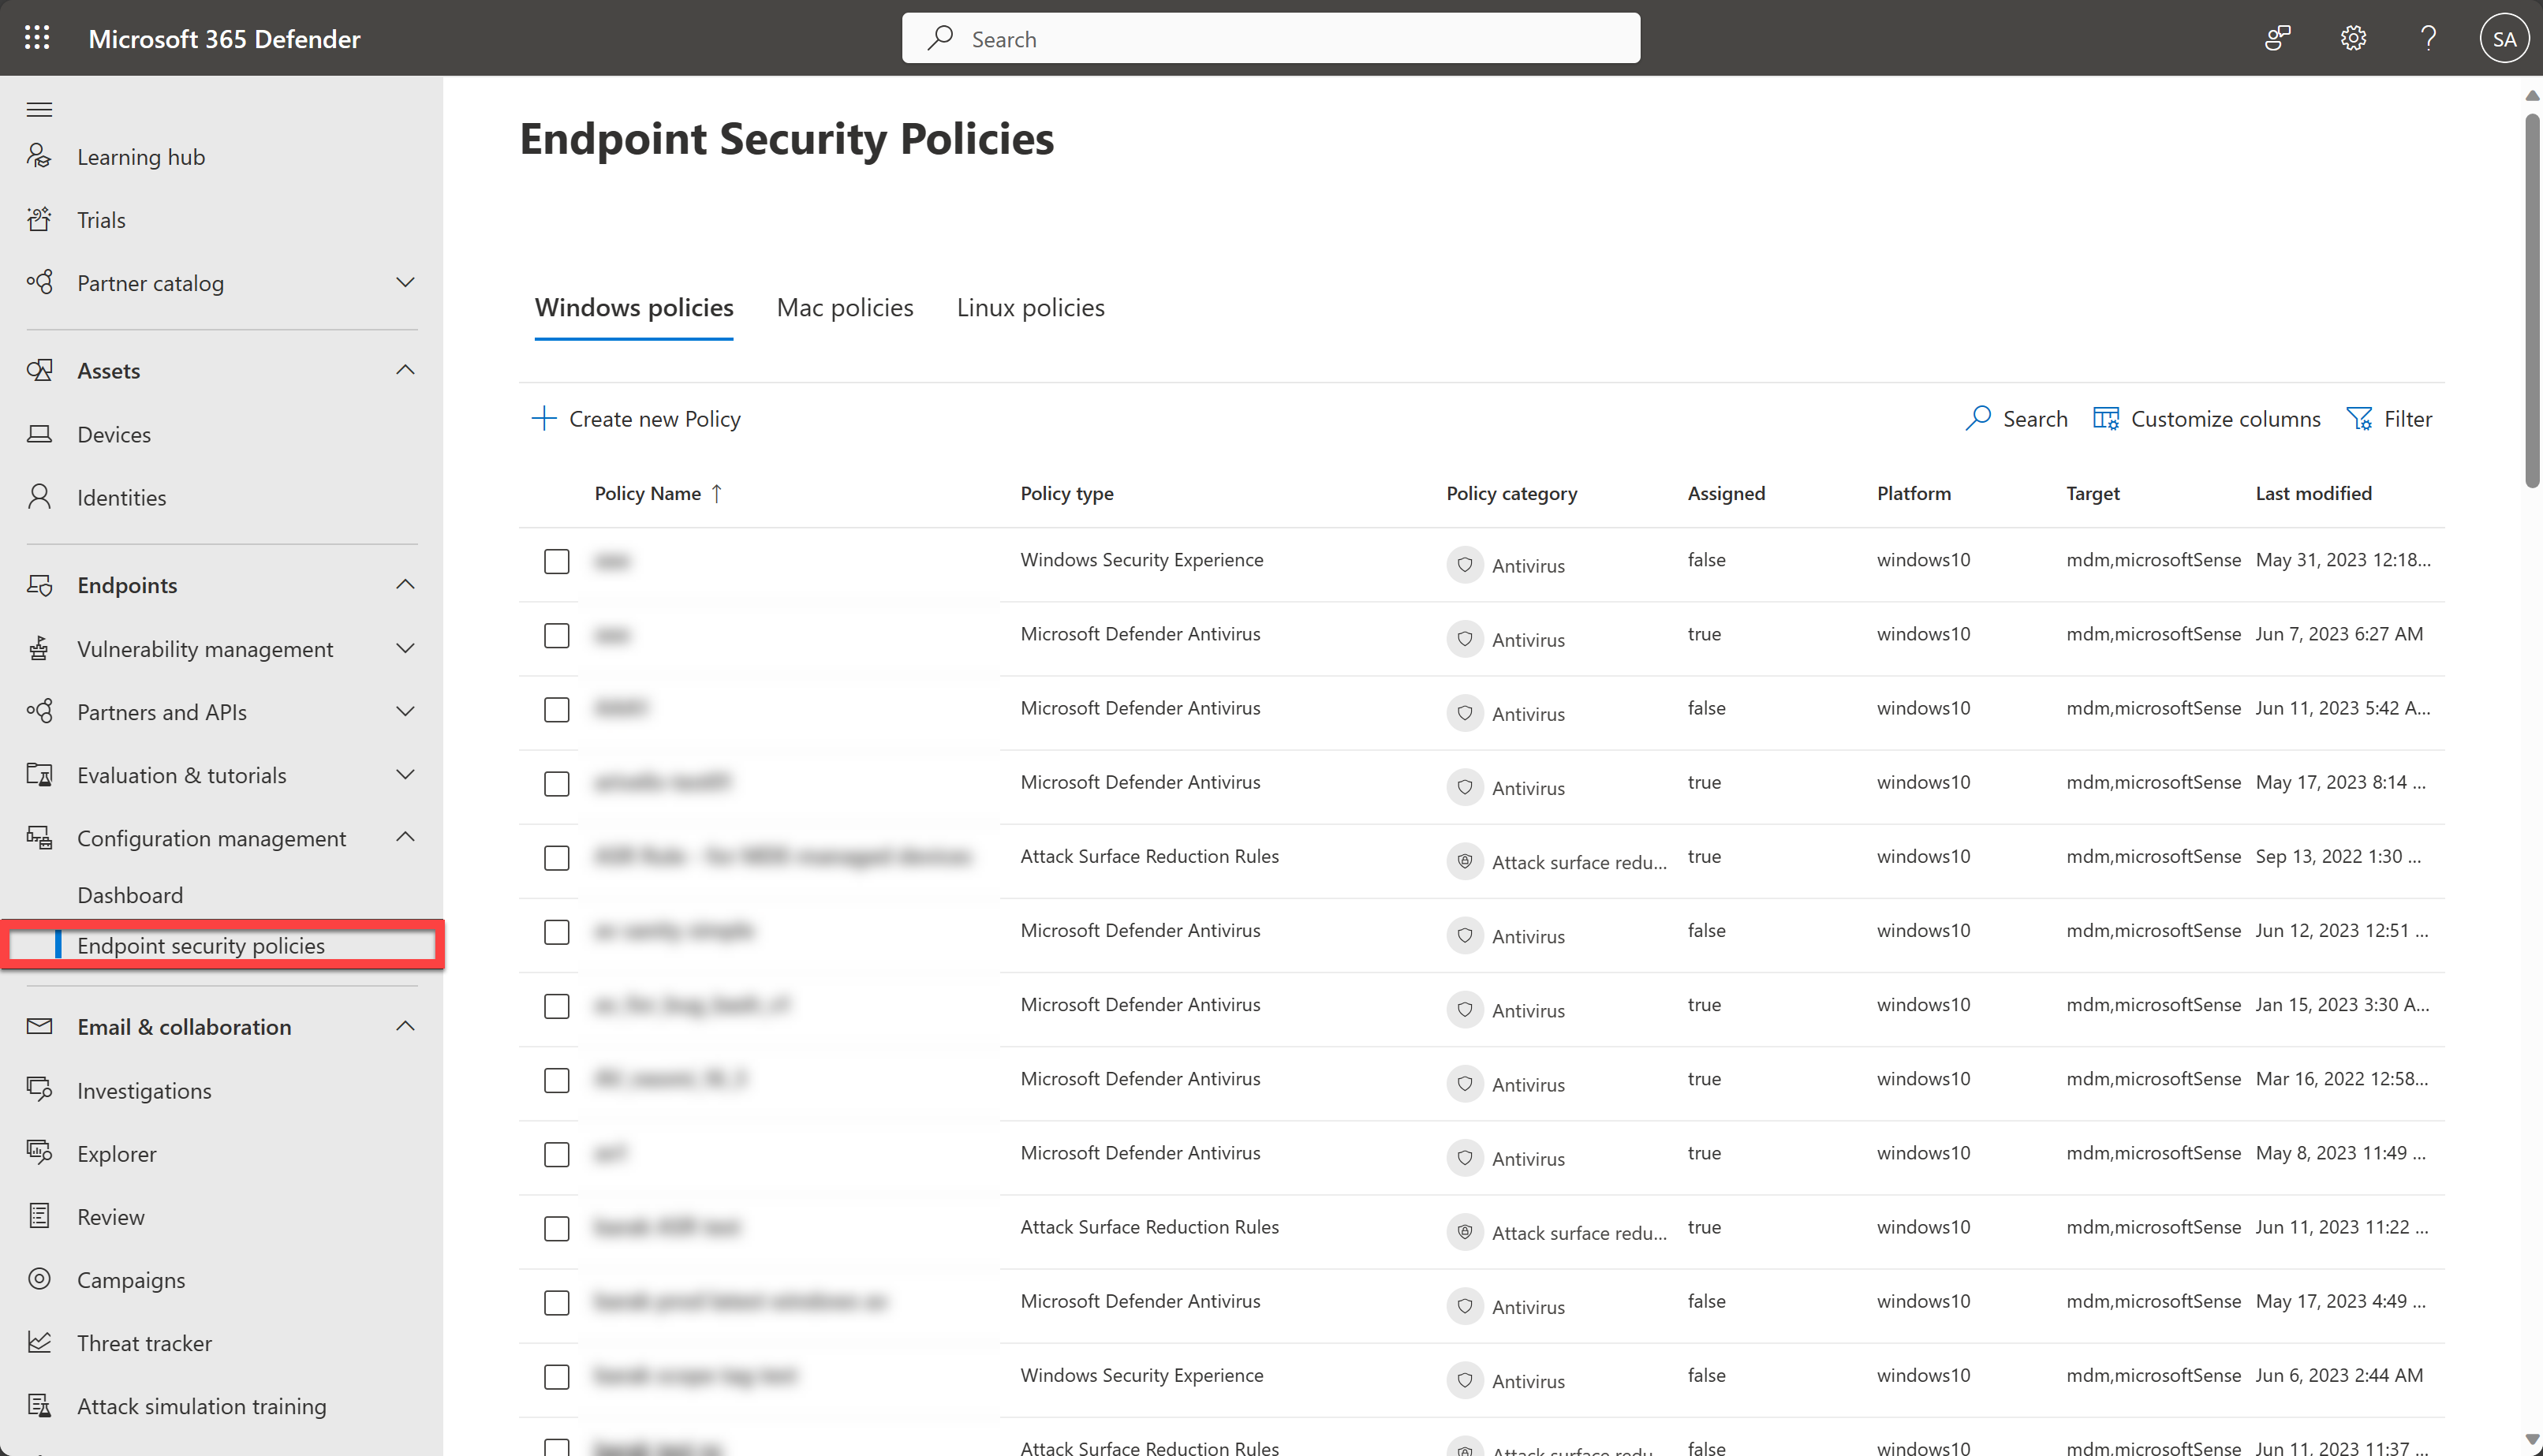 Managing Endpoint security policies in the Microsoft 365 Defender portal